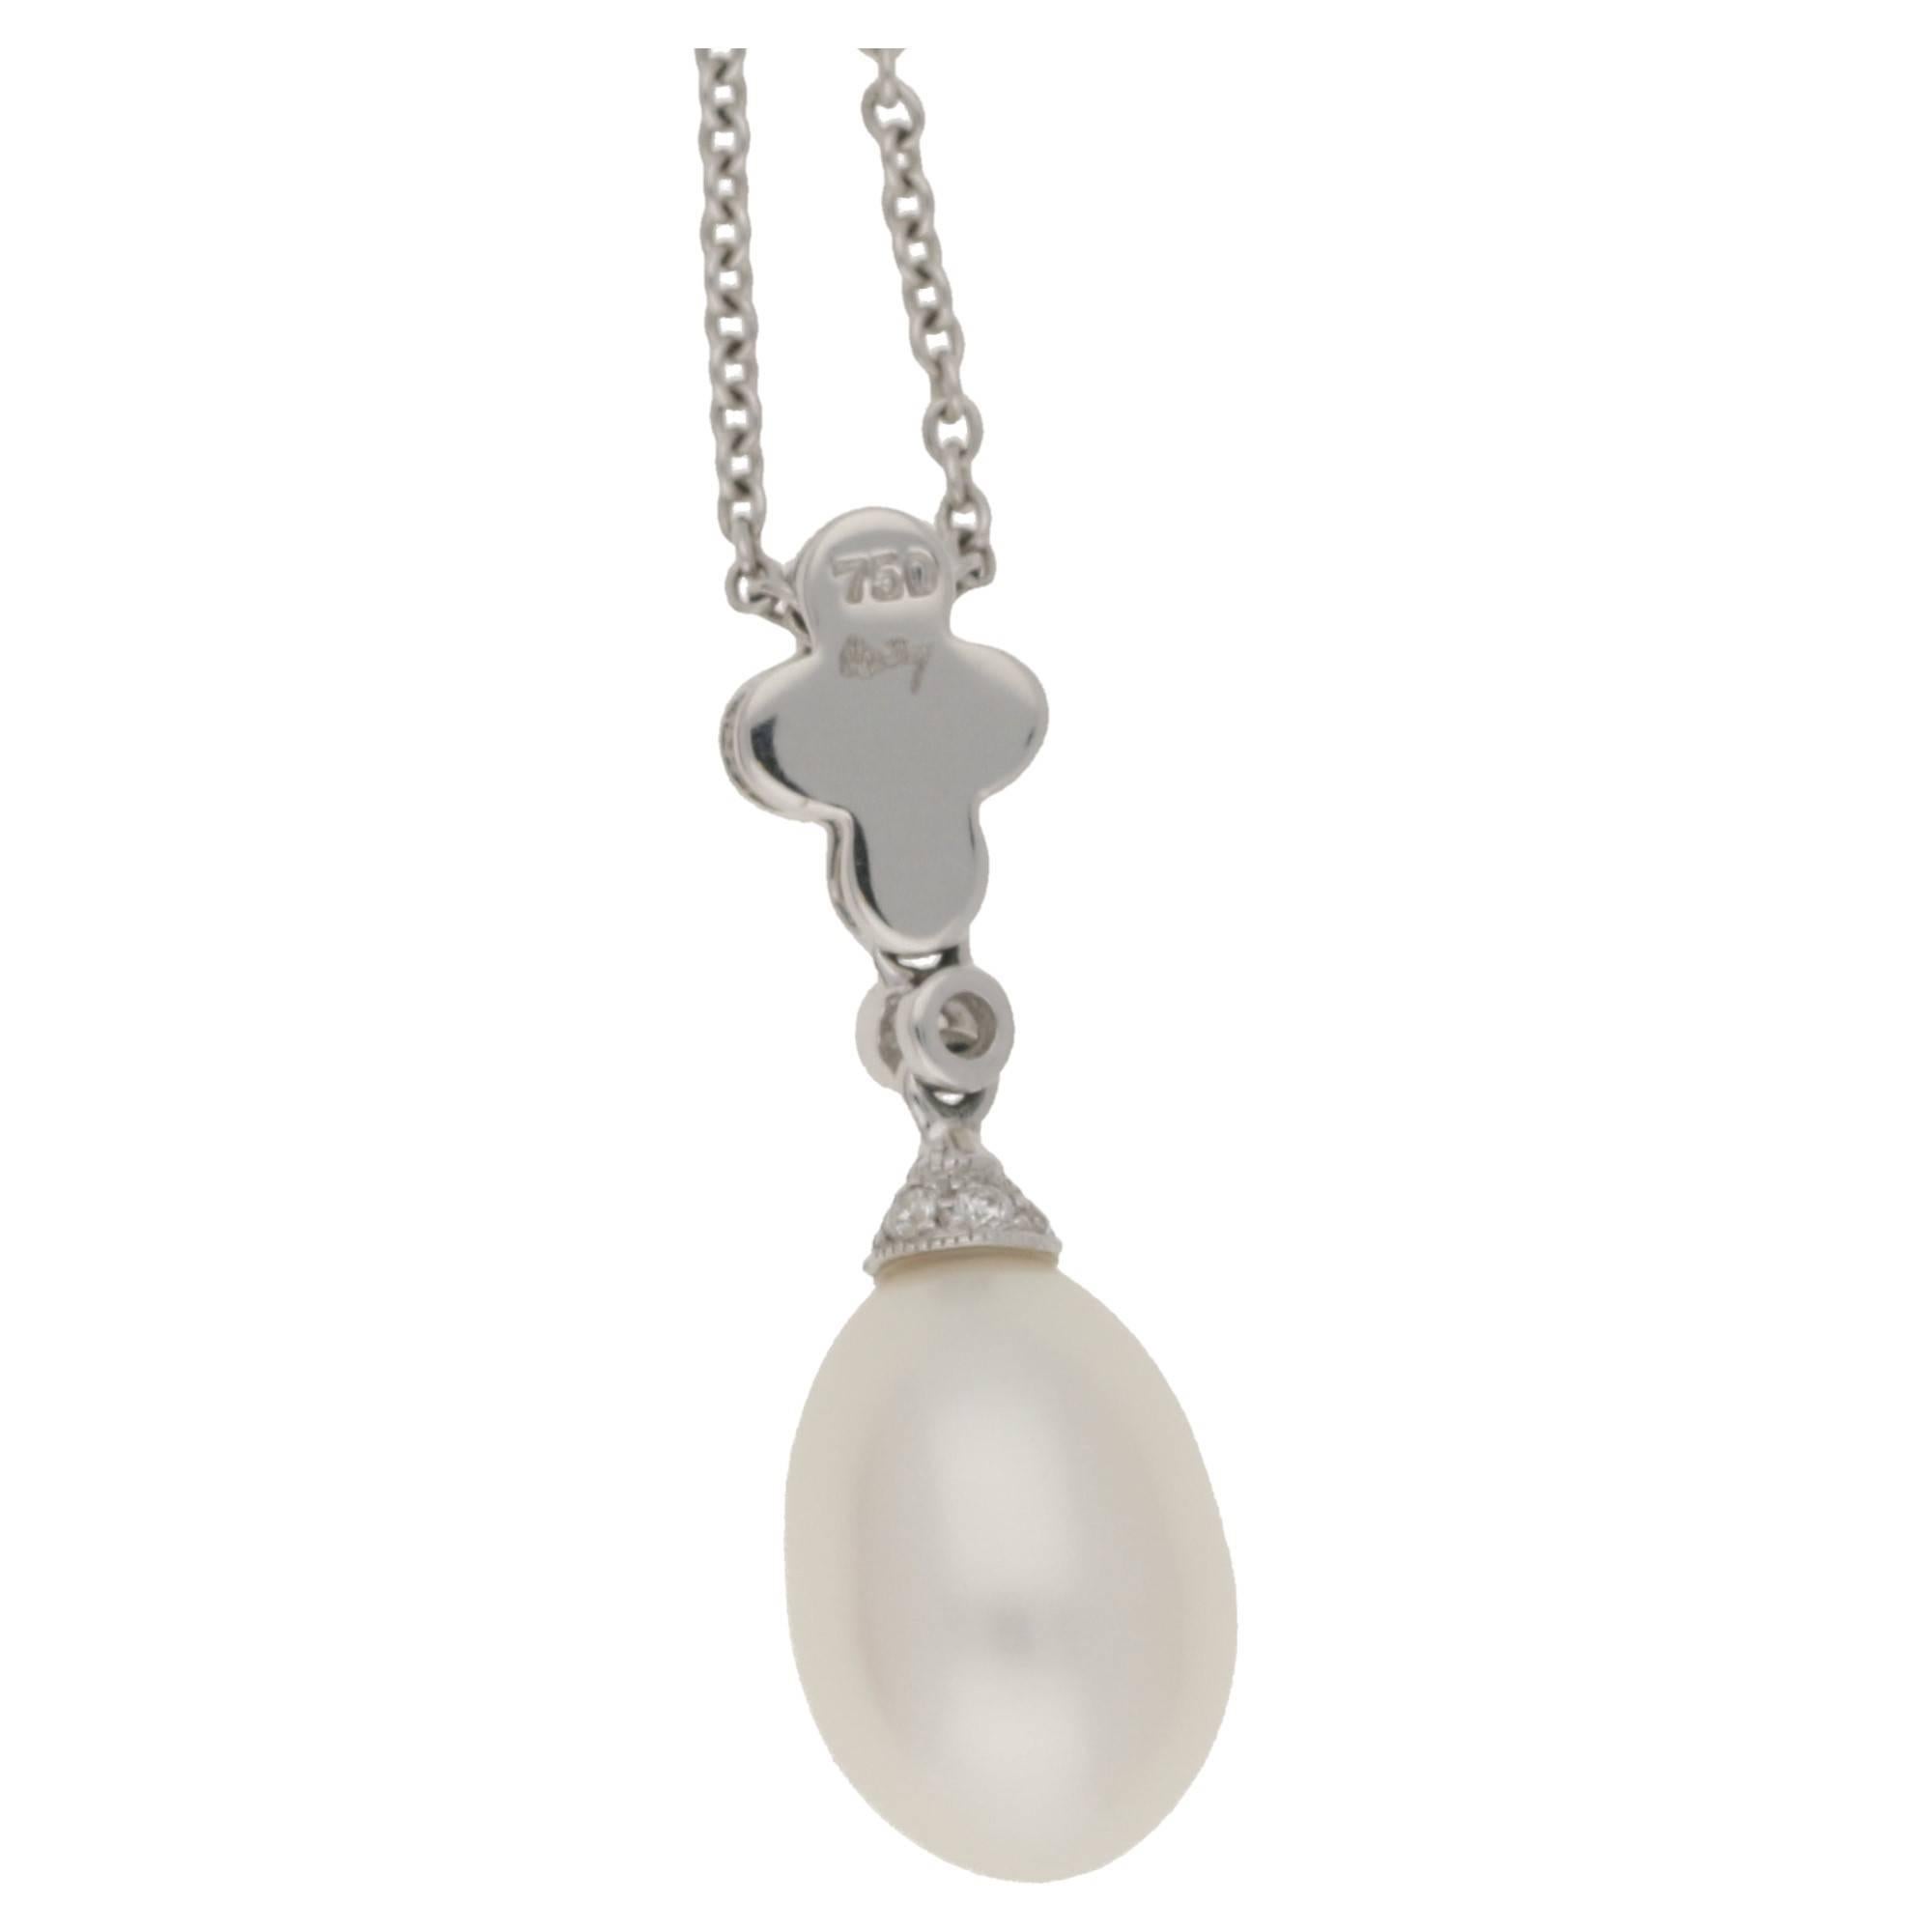 Pearl: 11.4mm. Estimated total diamond weight: 0.27cts. Assessed diamond colour: G-H. Assessed diamond clarity: VS1.
An 18ct white gold pearl and diamond drop pendant. 
The elongated oval pearl displays a beautiful orient and exceptional lustre